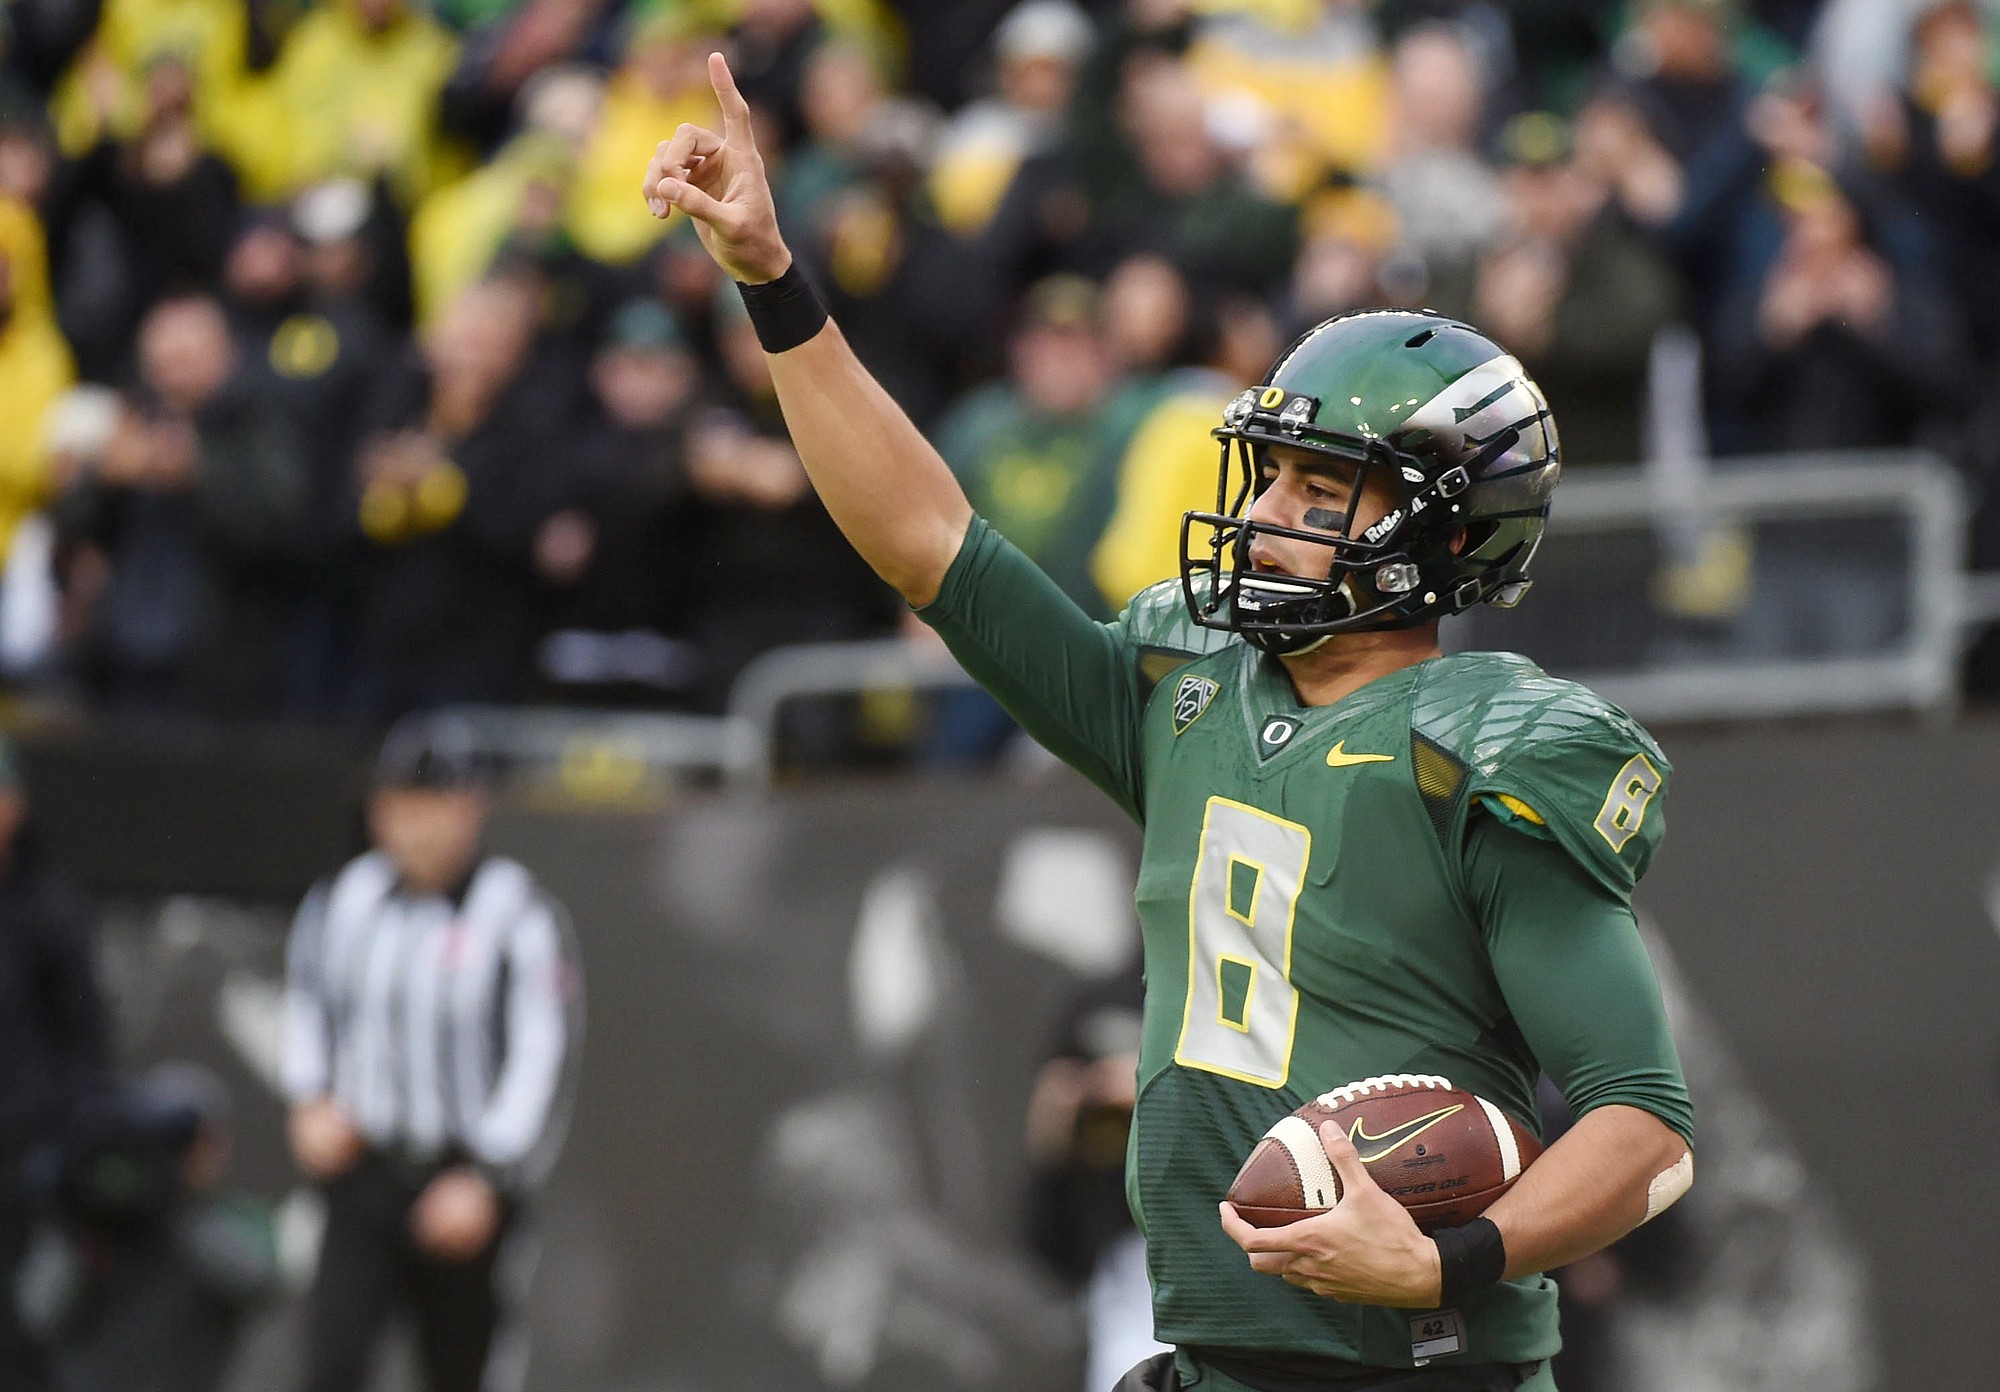 Oregon quarterback Marcus Mariota celebrates after scoring a touchdown during the first quarter of an NCAA college football game against Colorado in November in Eugene, Ore.